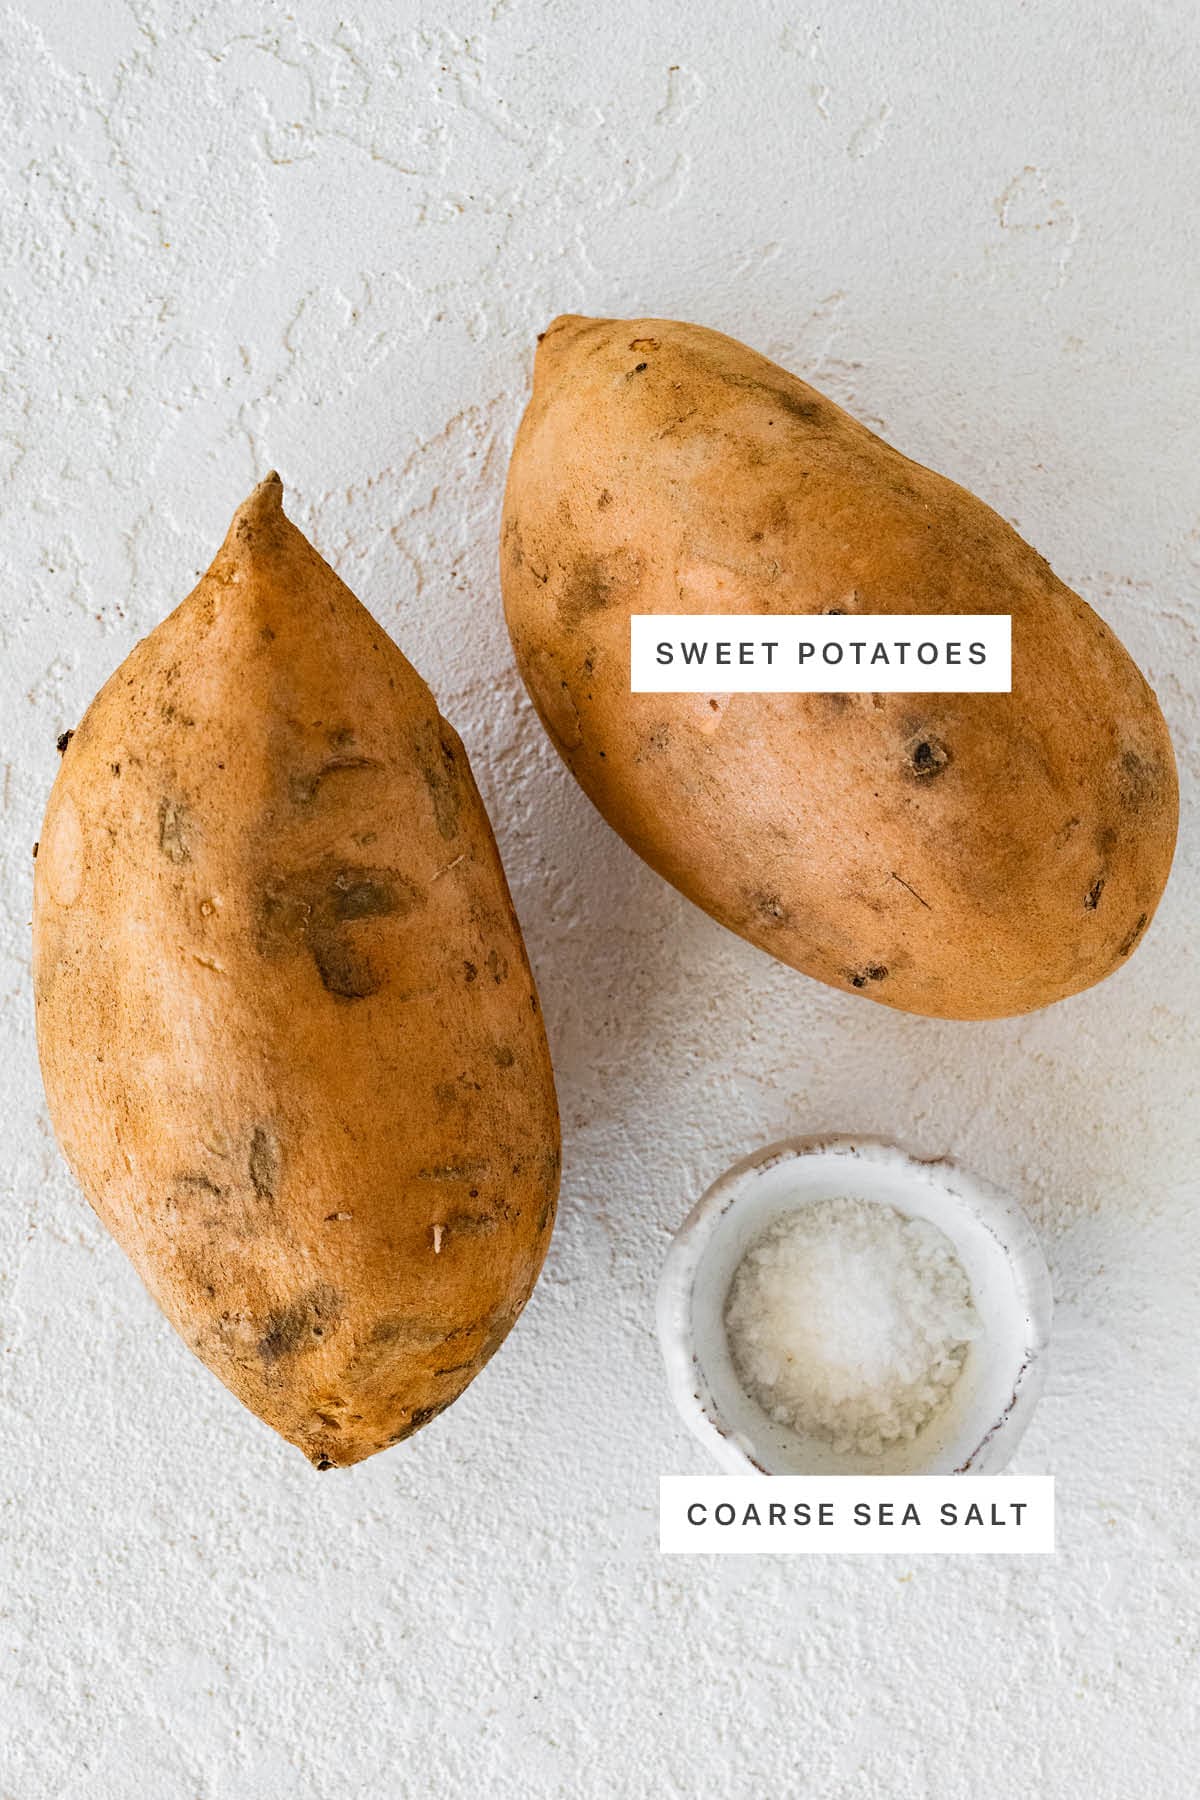 Ingredients measured out to make Air Fryer Baked Sweet Potato: sweet potatoes and coarse sea salt.